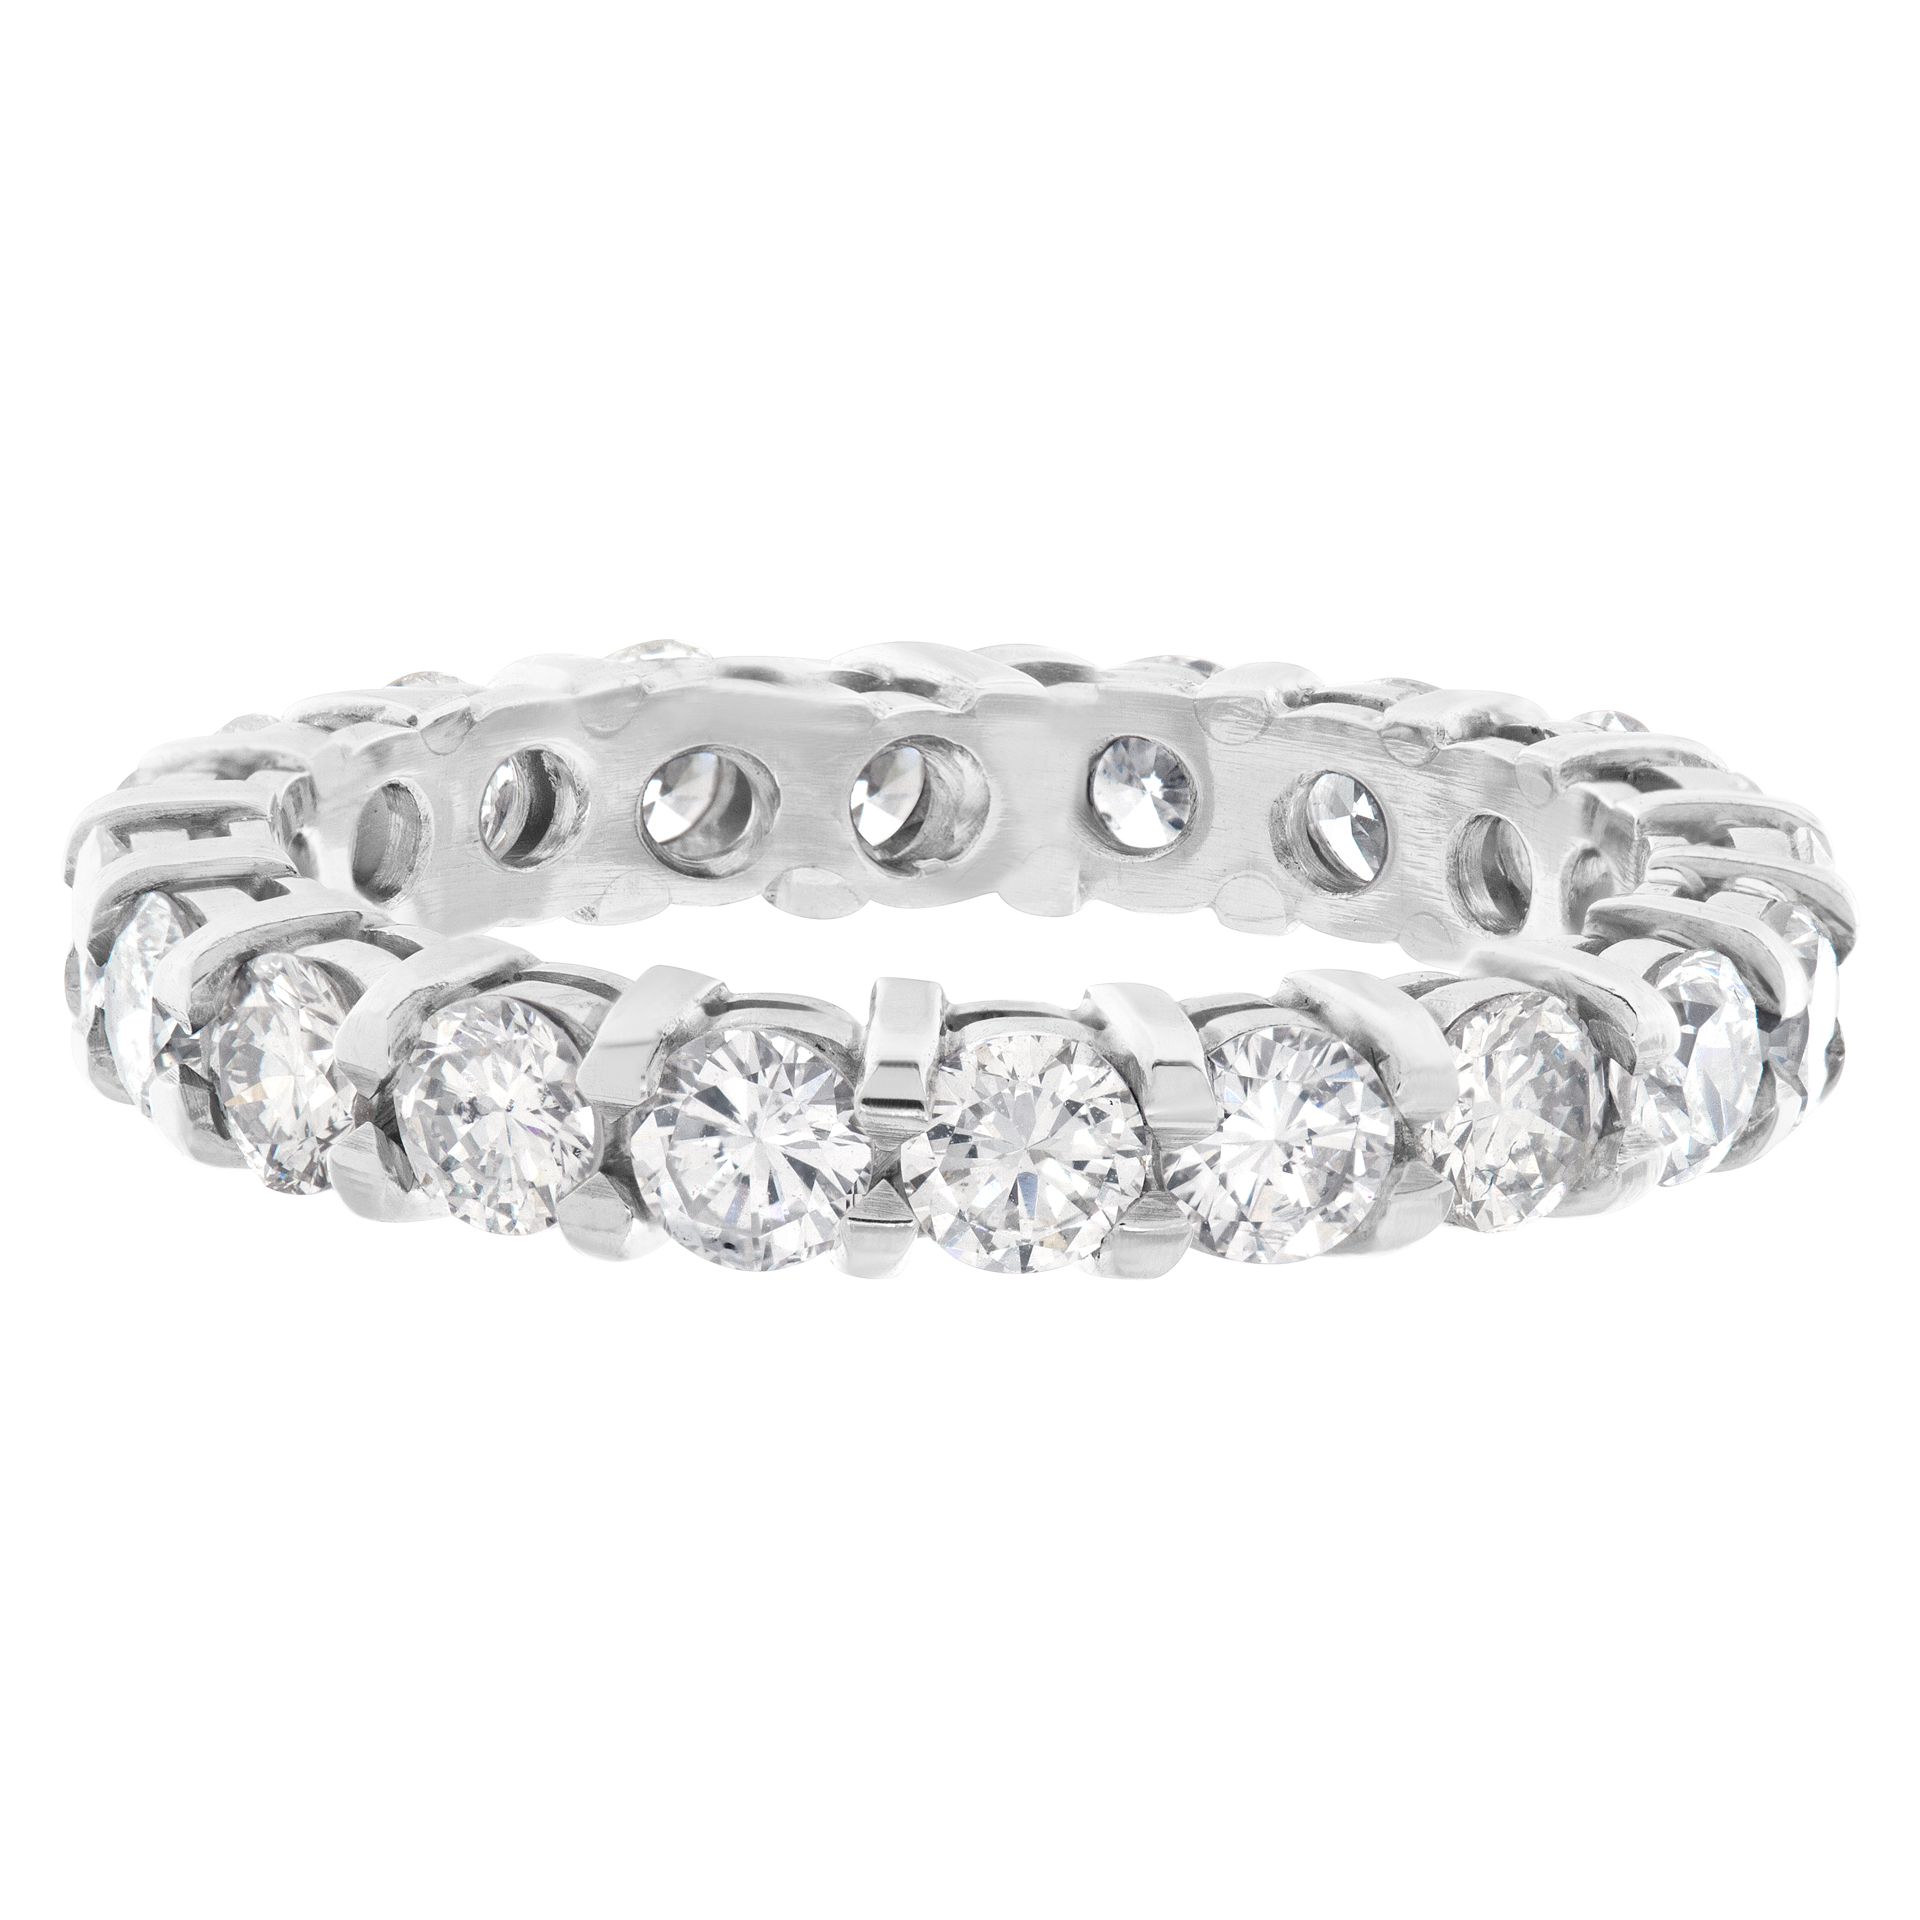 Diamond Eternity Band and Ring with 1.95 carats in diamonds set in platinum